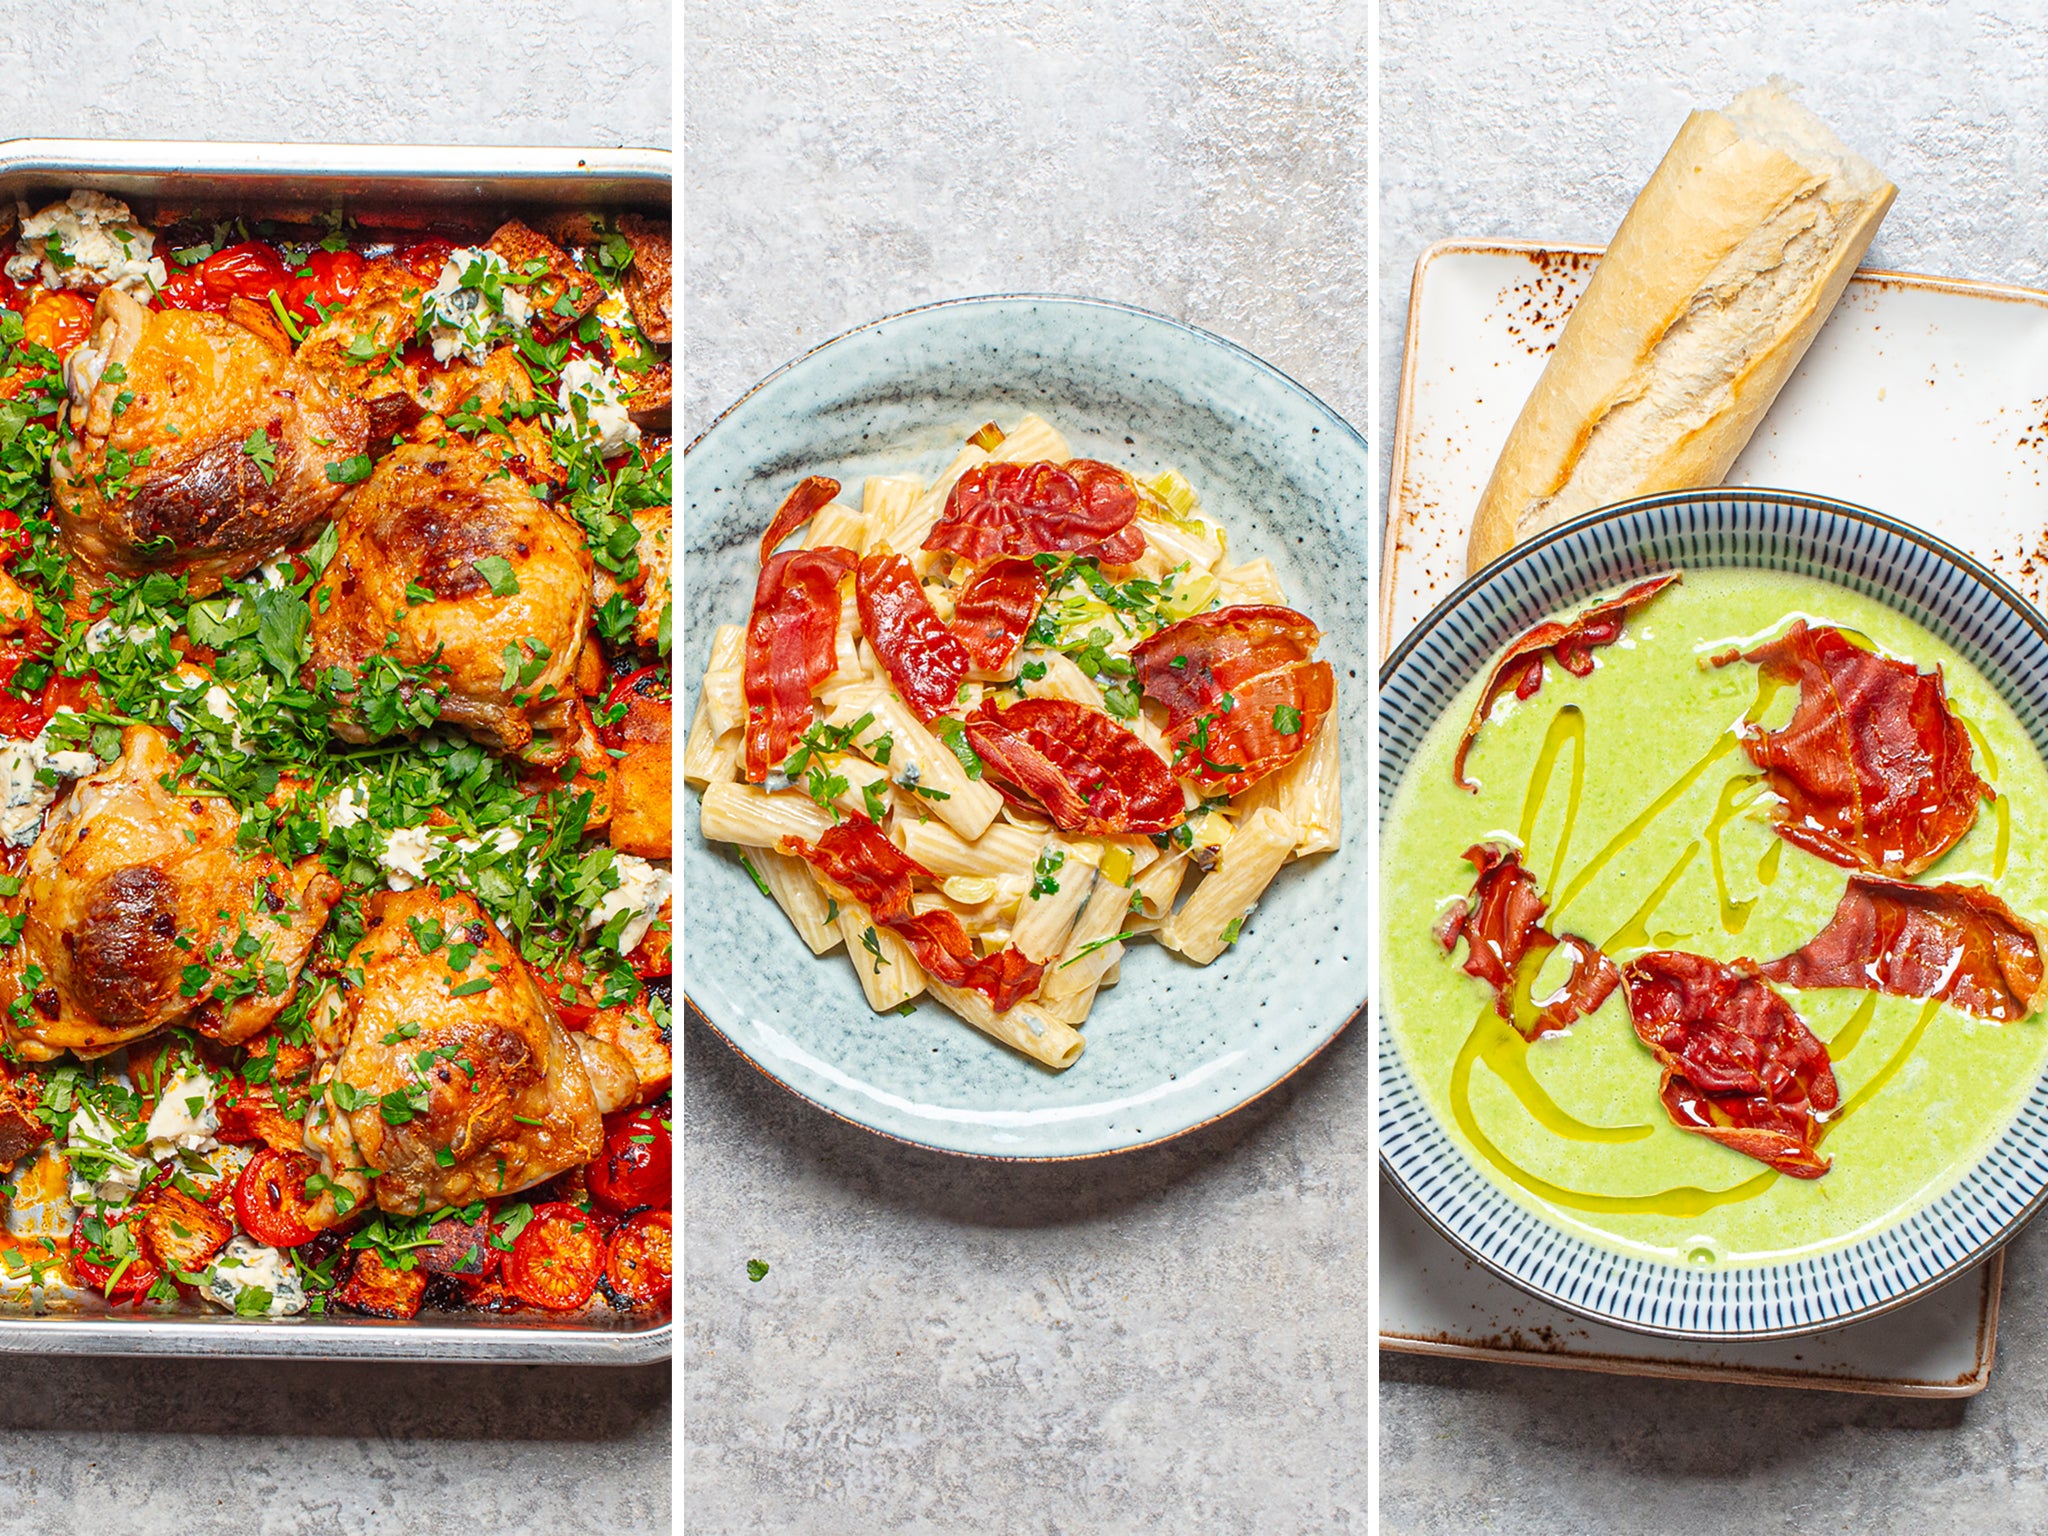 These recipes maximise on flavour, and minimise on food waste, mess and washing up